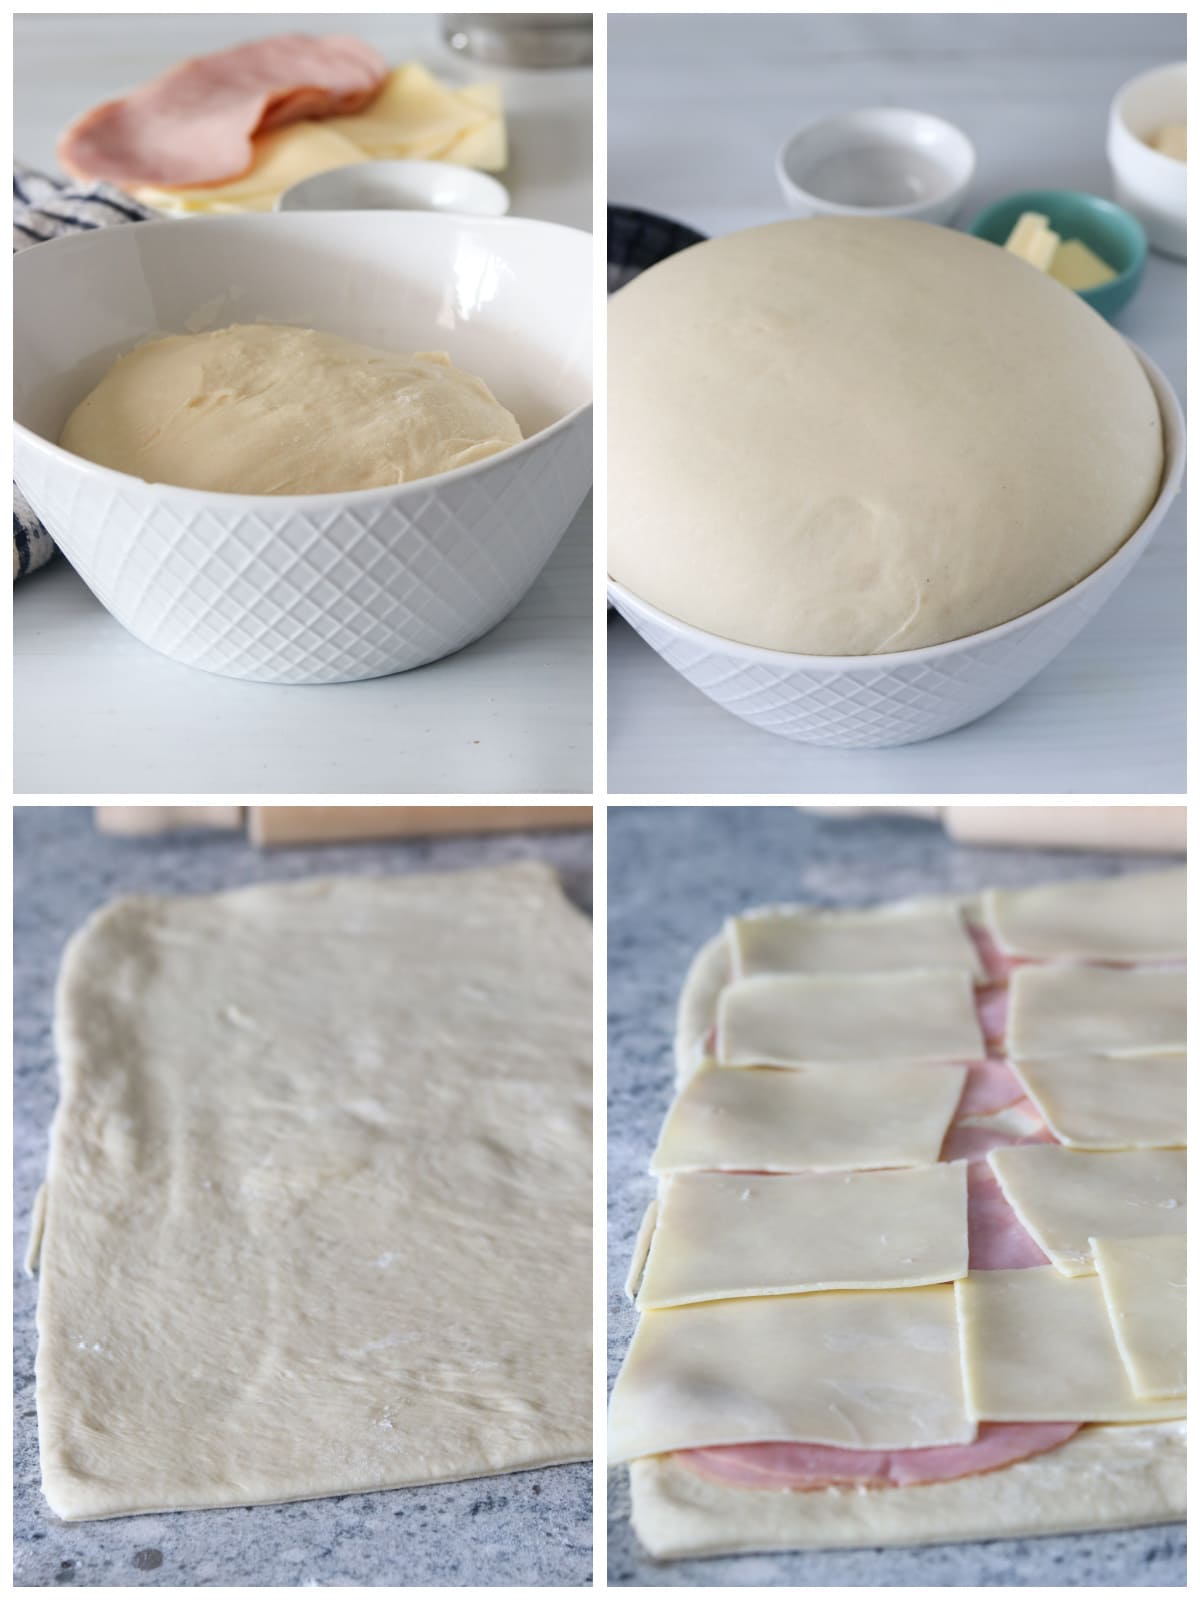 A photo collage showing how the dough was rolled and filled to make ham and cheese rolls.